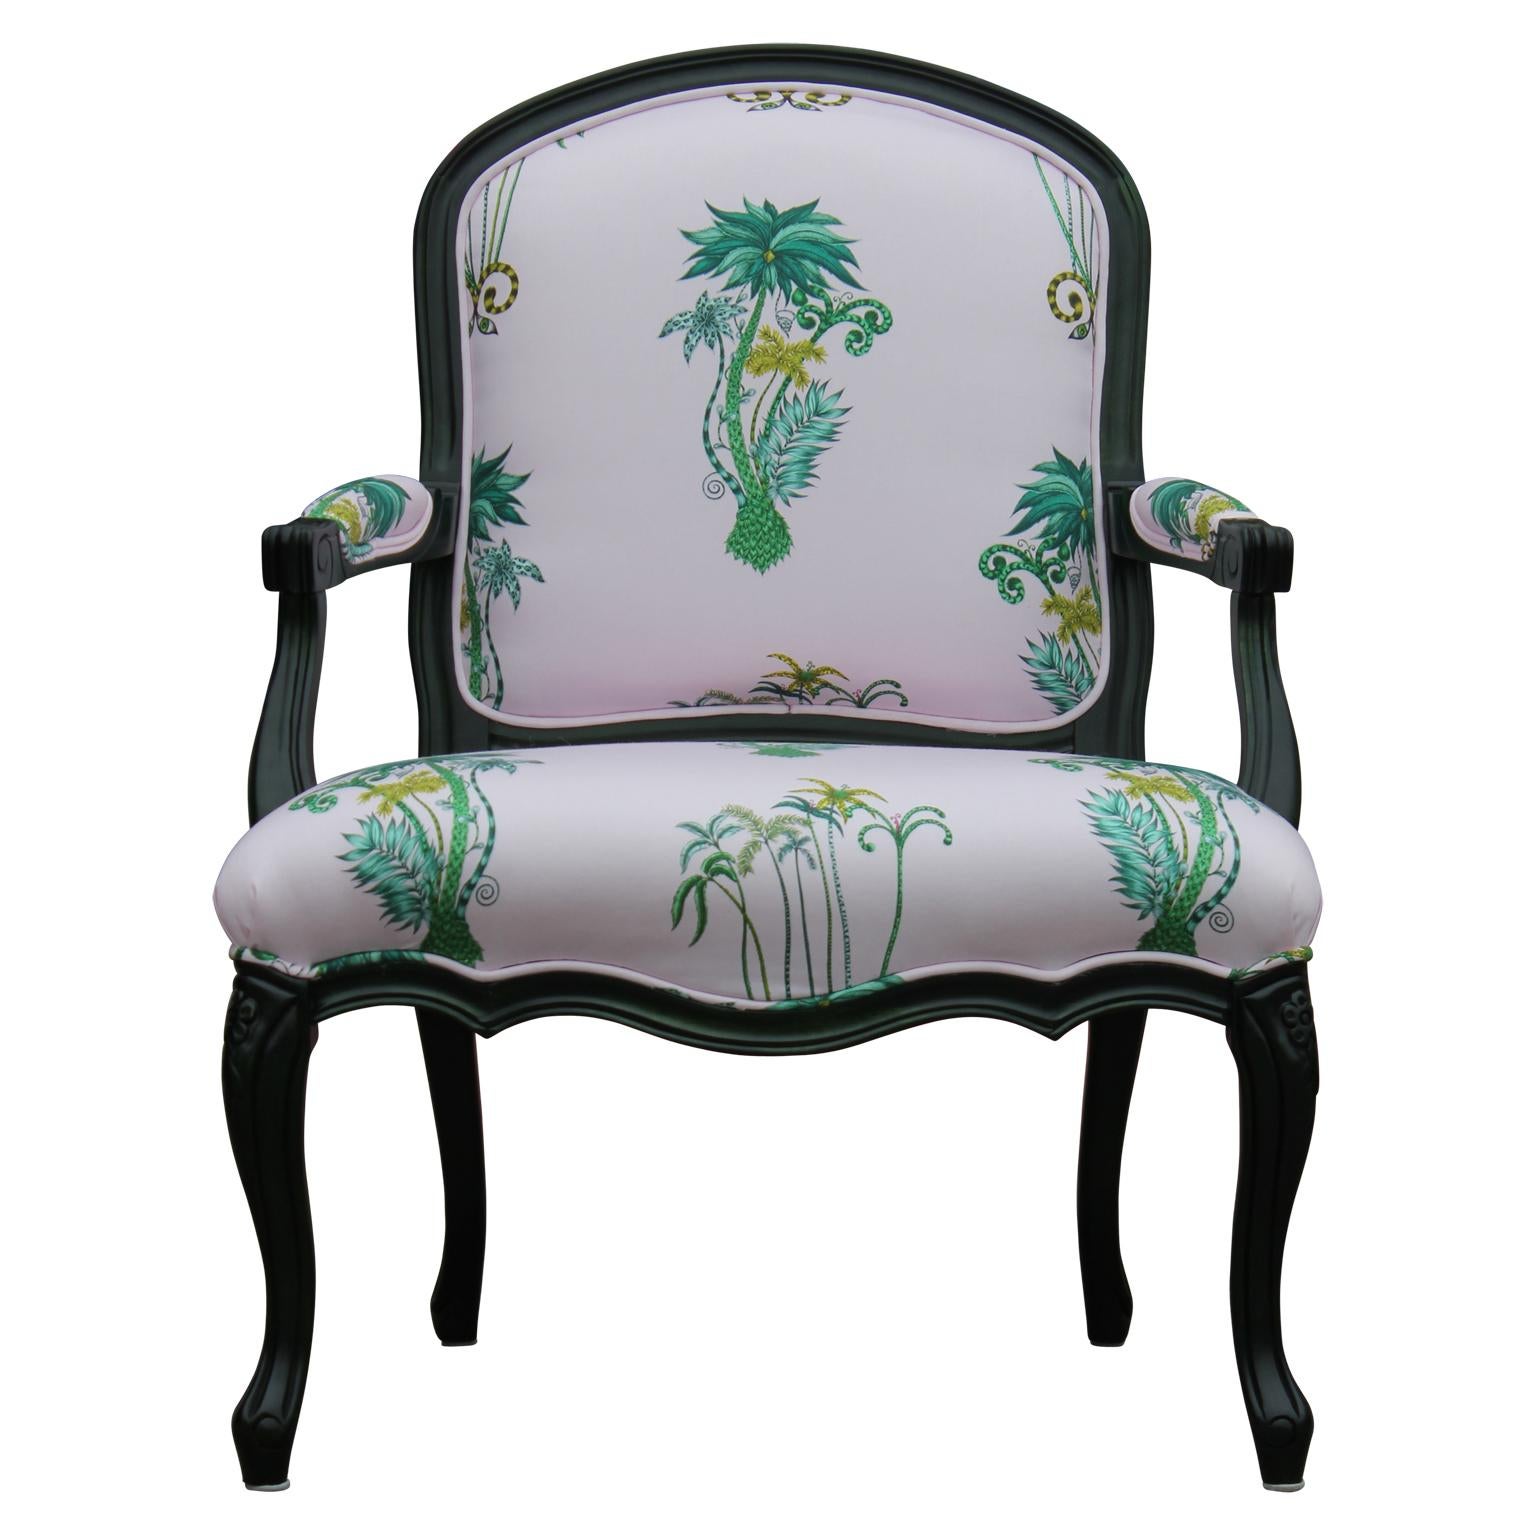 Beautiful Louis the XV style green dyed French armchair with custom pink tropical upholstery featuring a floral palm tree design.